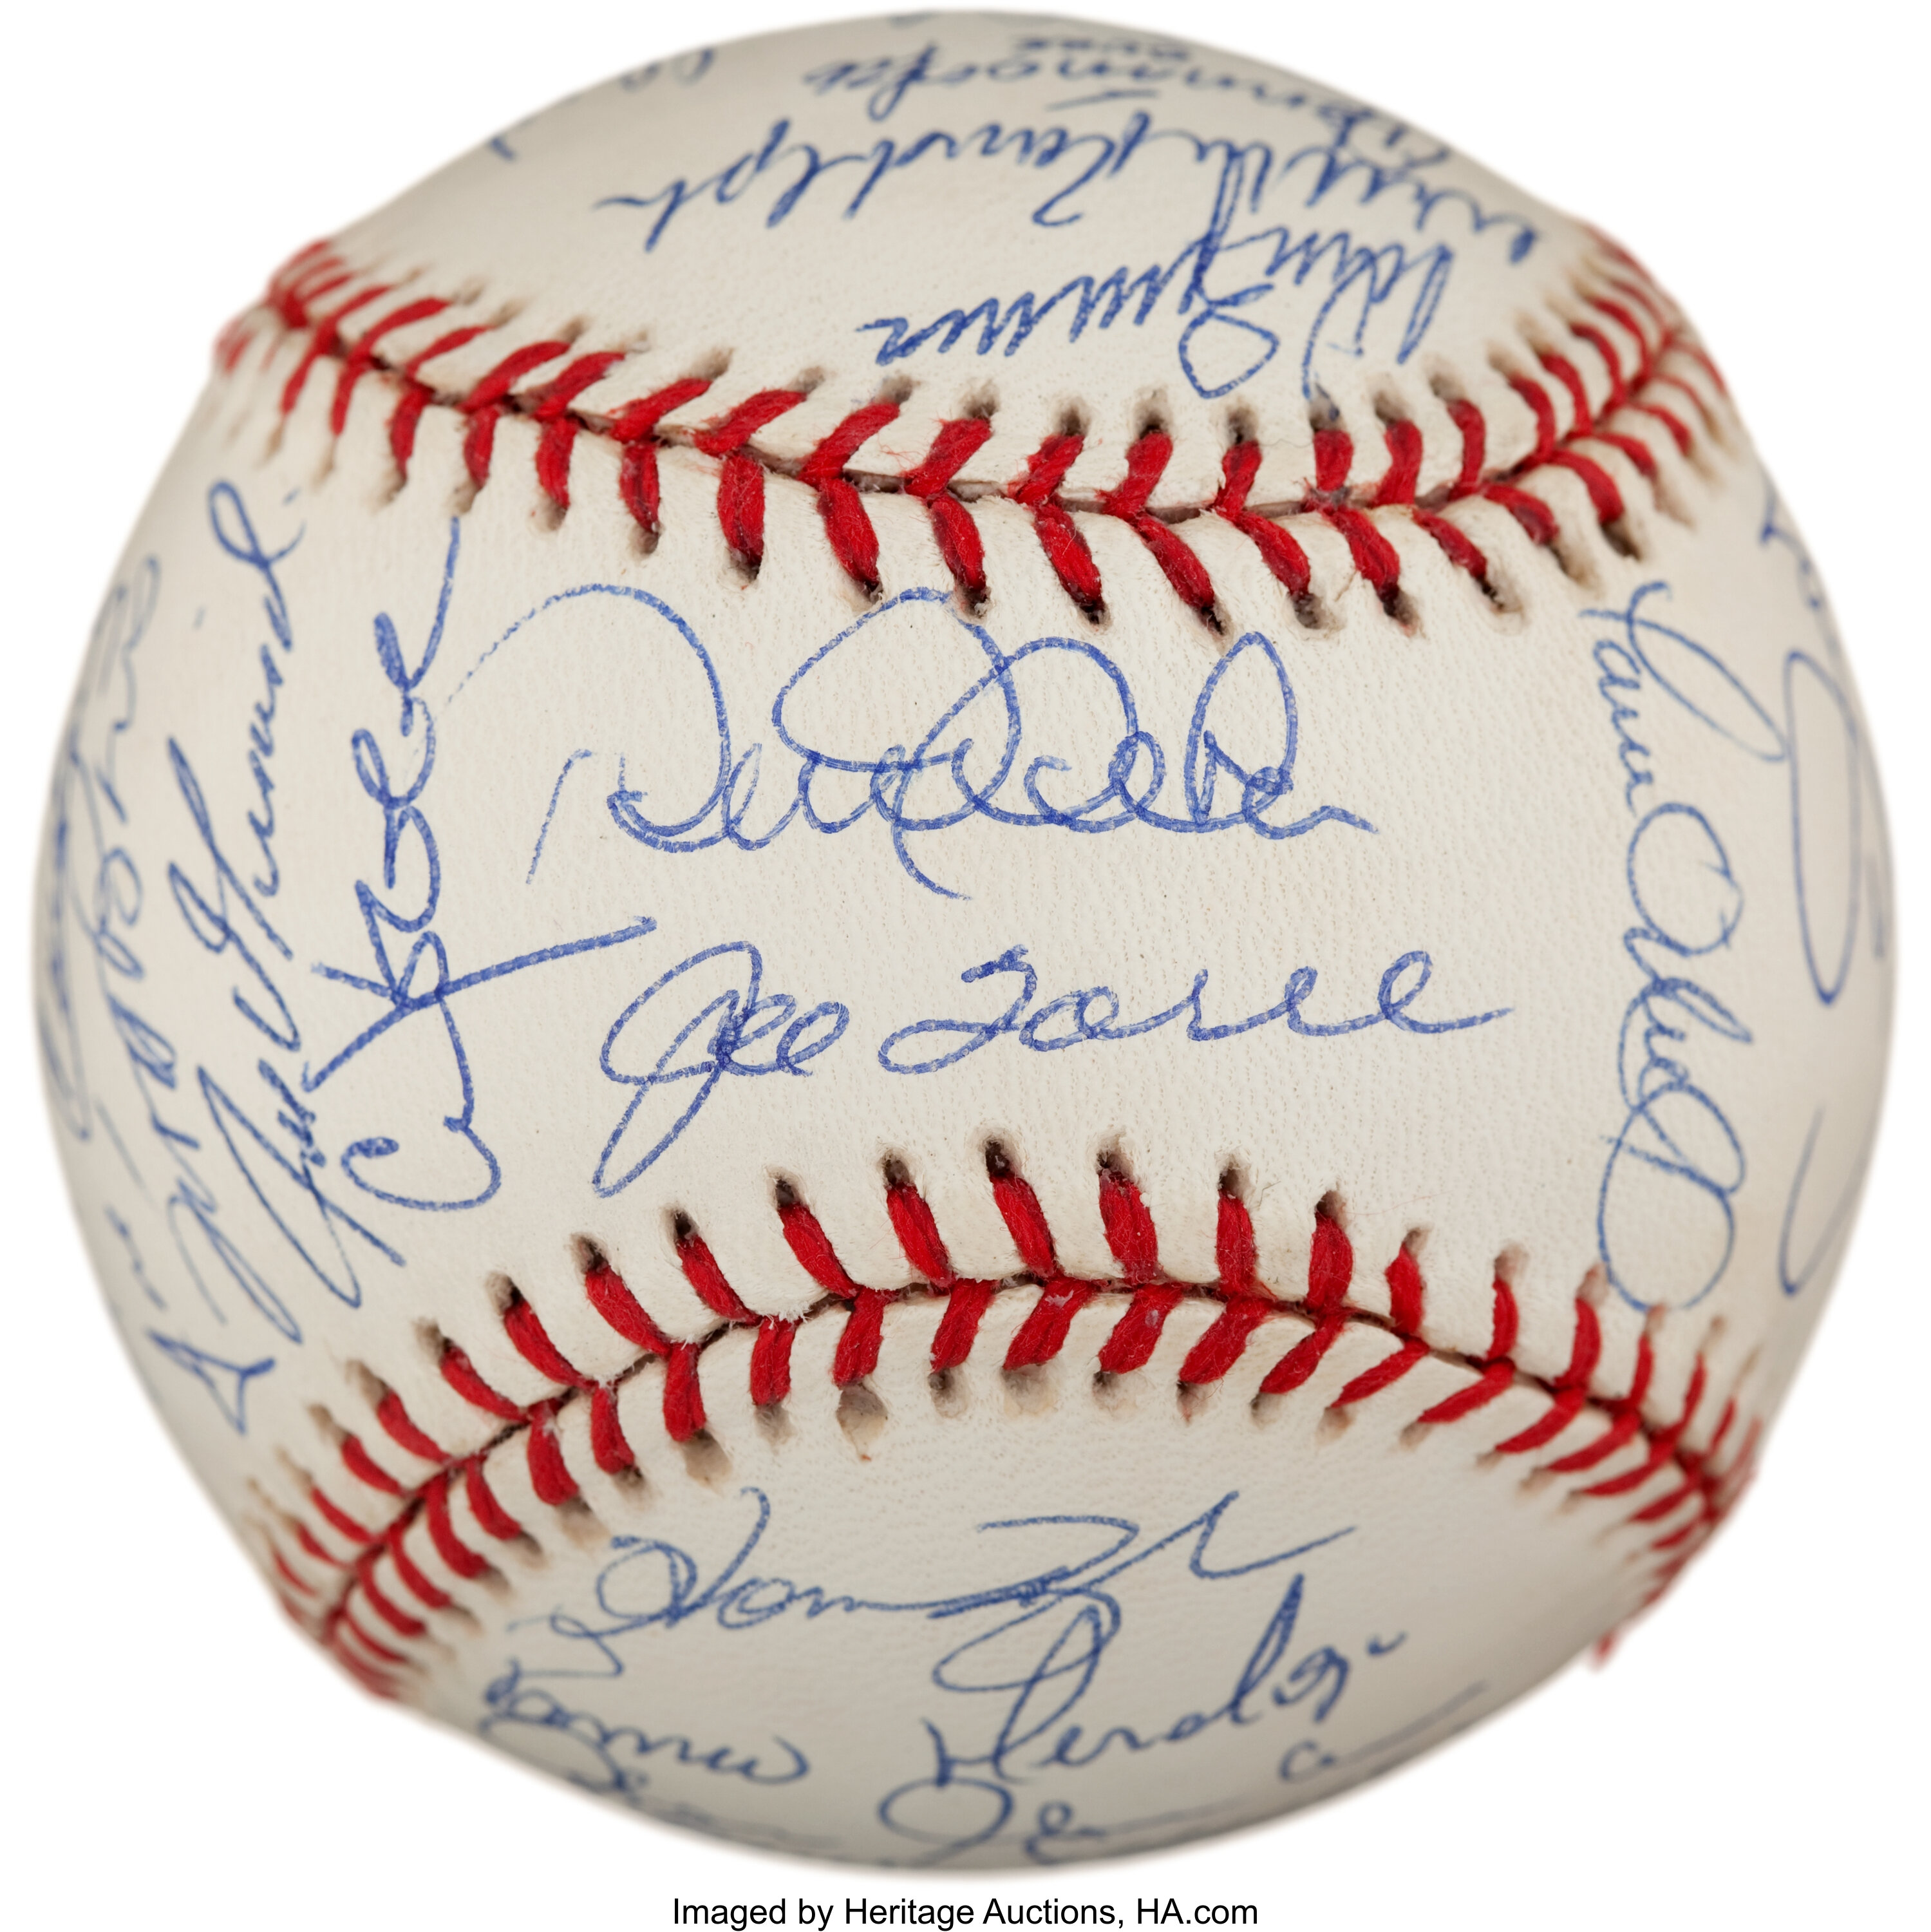 1927 Yankees Team-signed Baseball & Stamped Ball, Antiques Roadshow